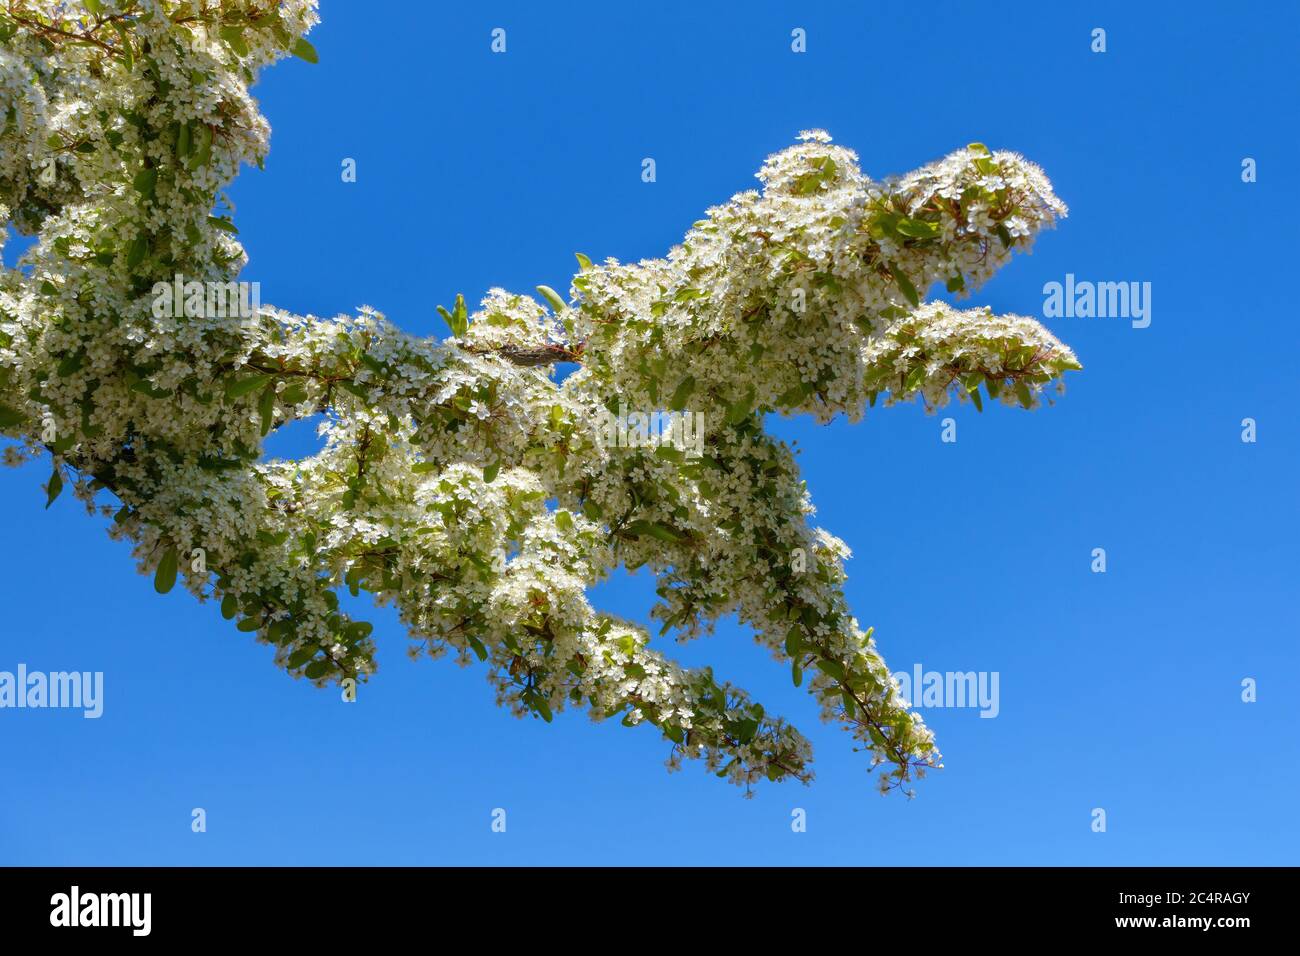 White spring blossom flowers covering branches of Pyracantha Firethorn against clear deep blue sky in May, England, UK Stock Photo